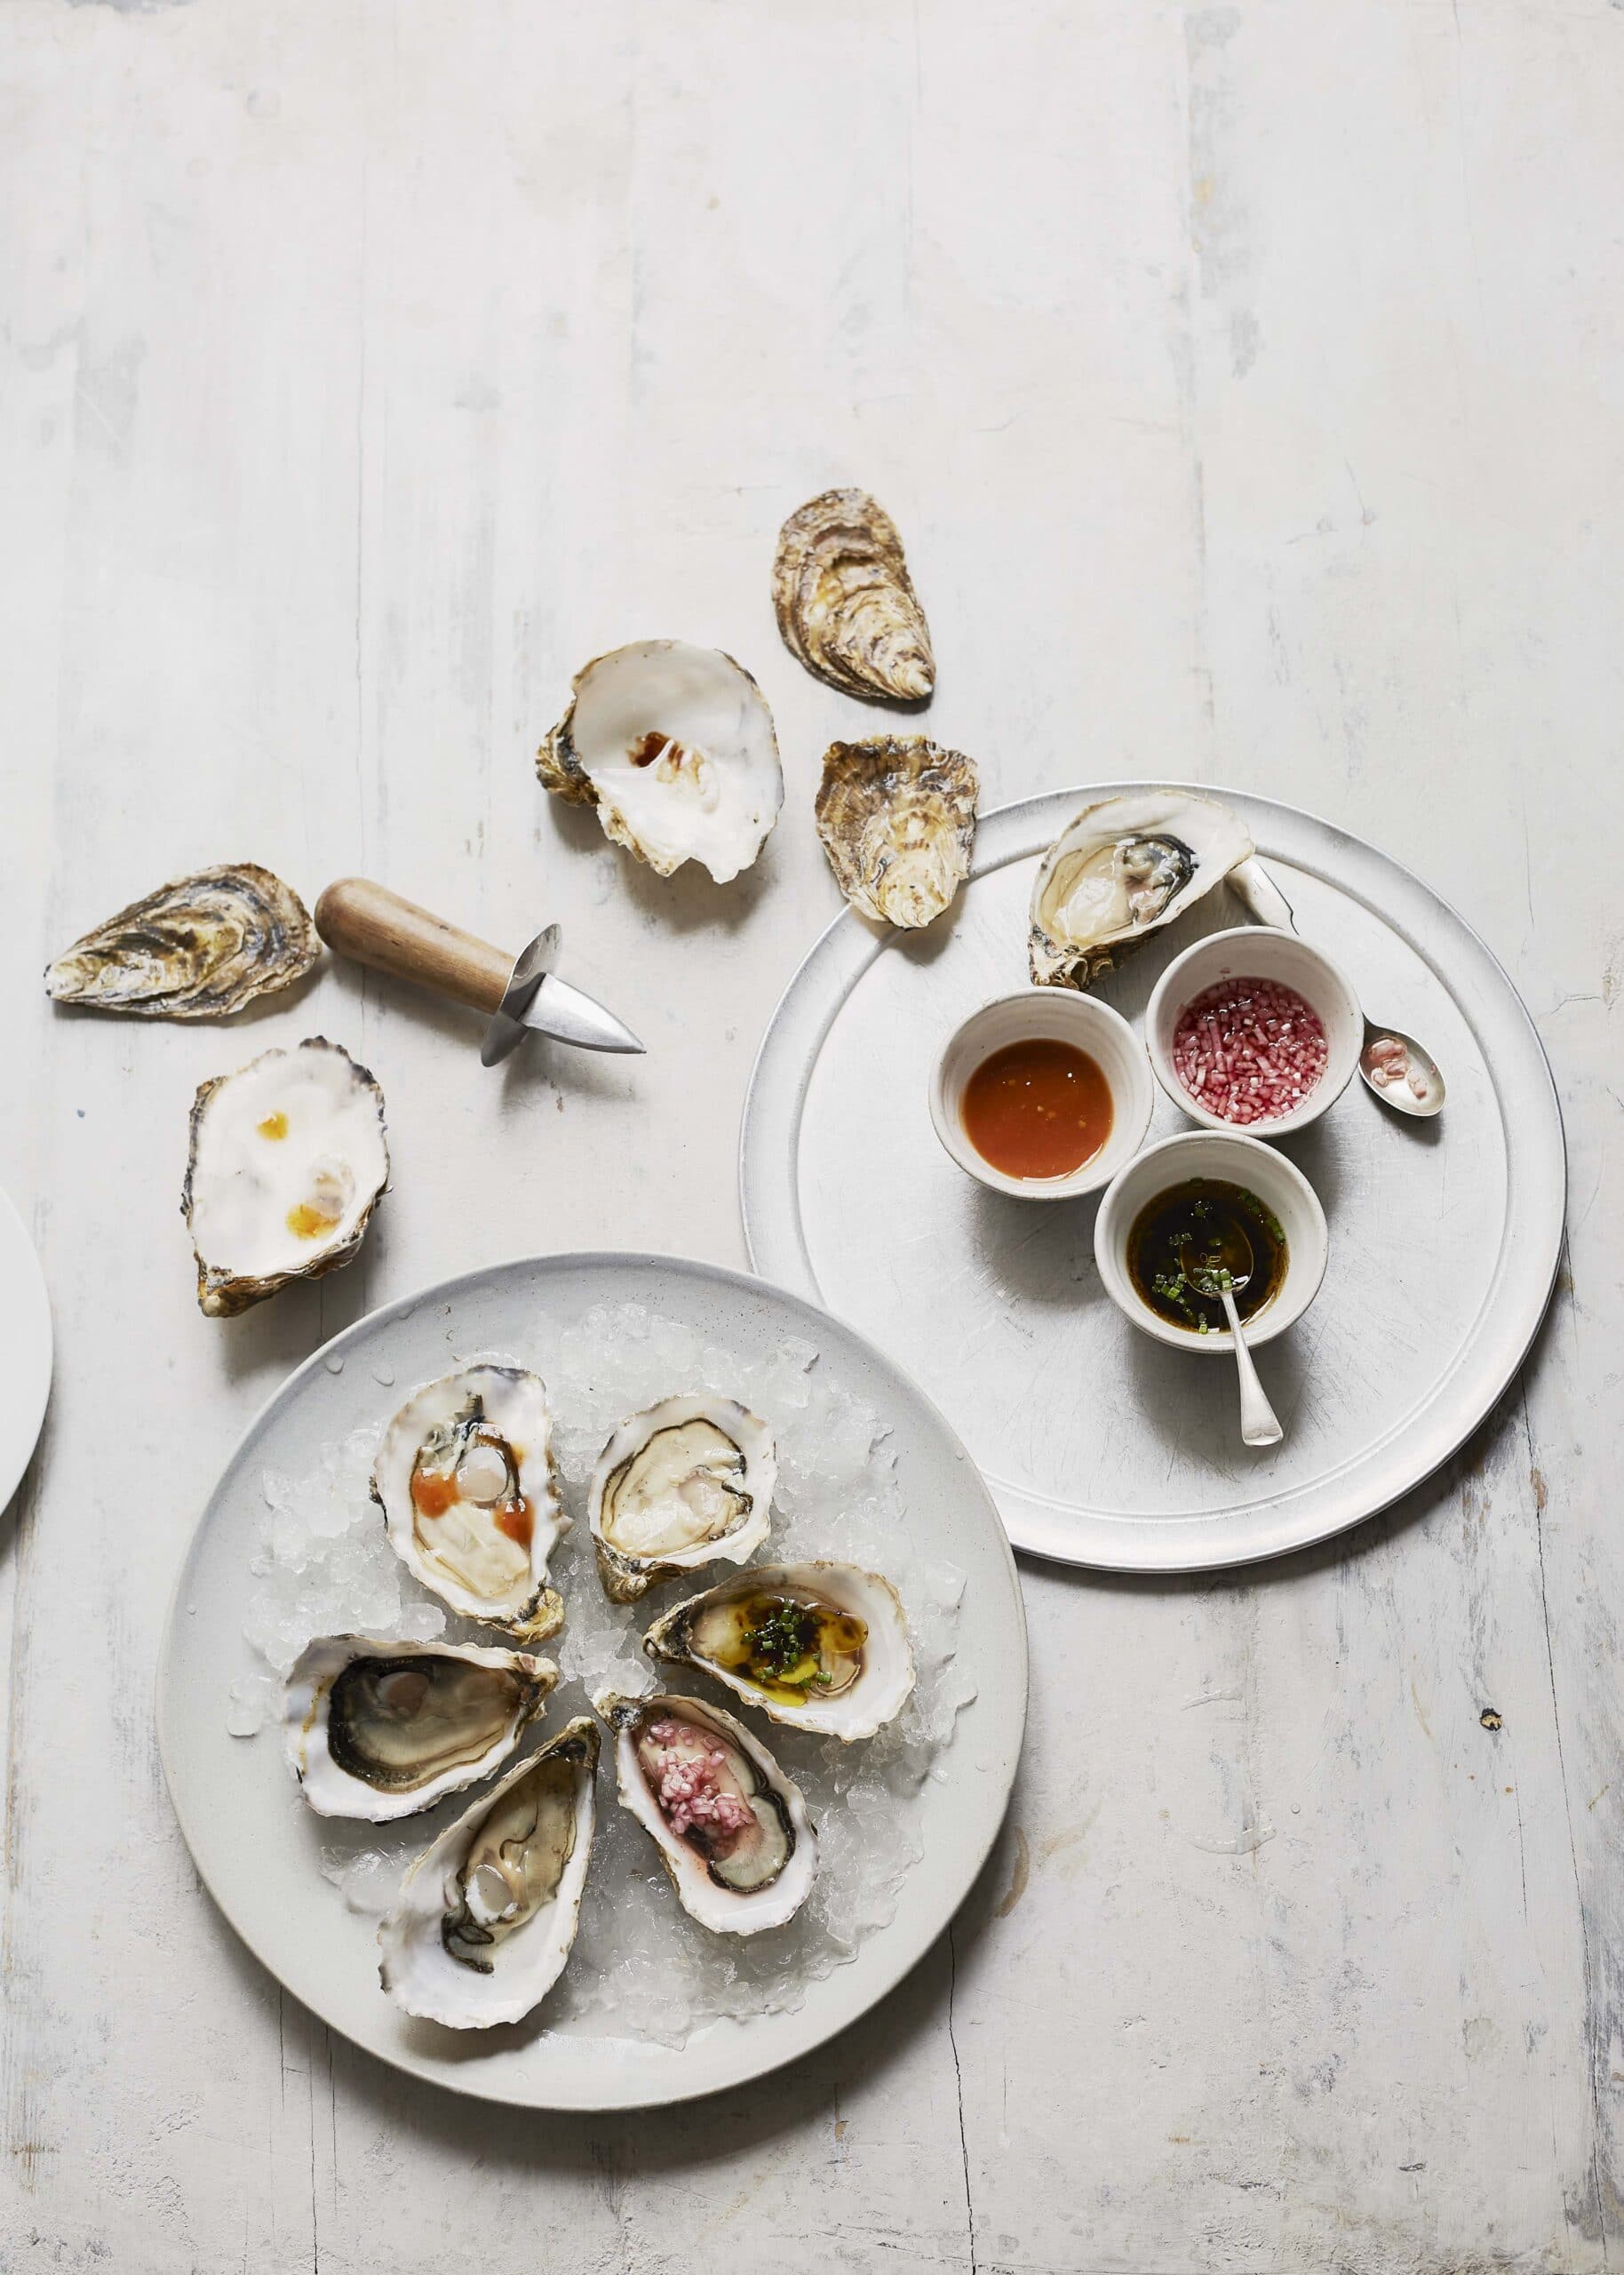 Oysters with Market garnishes 1